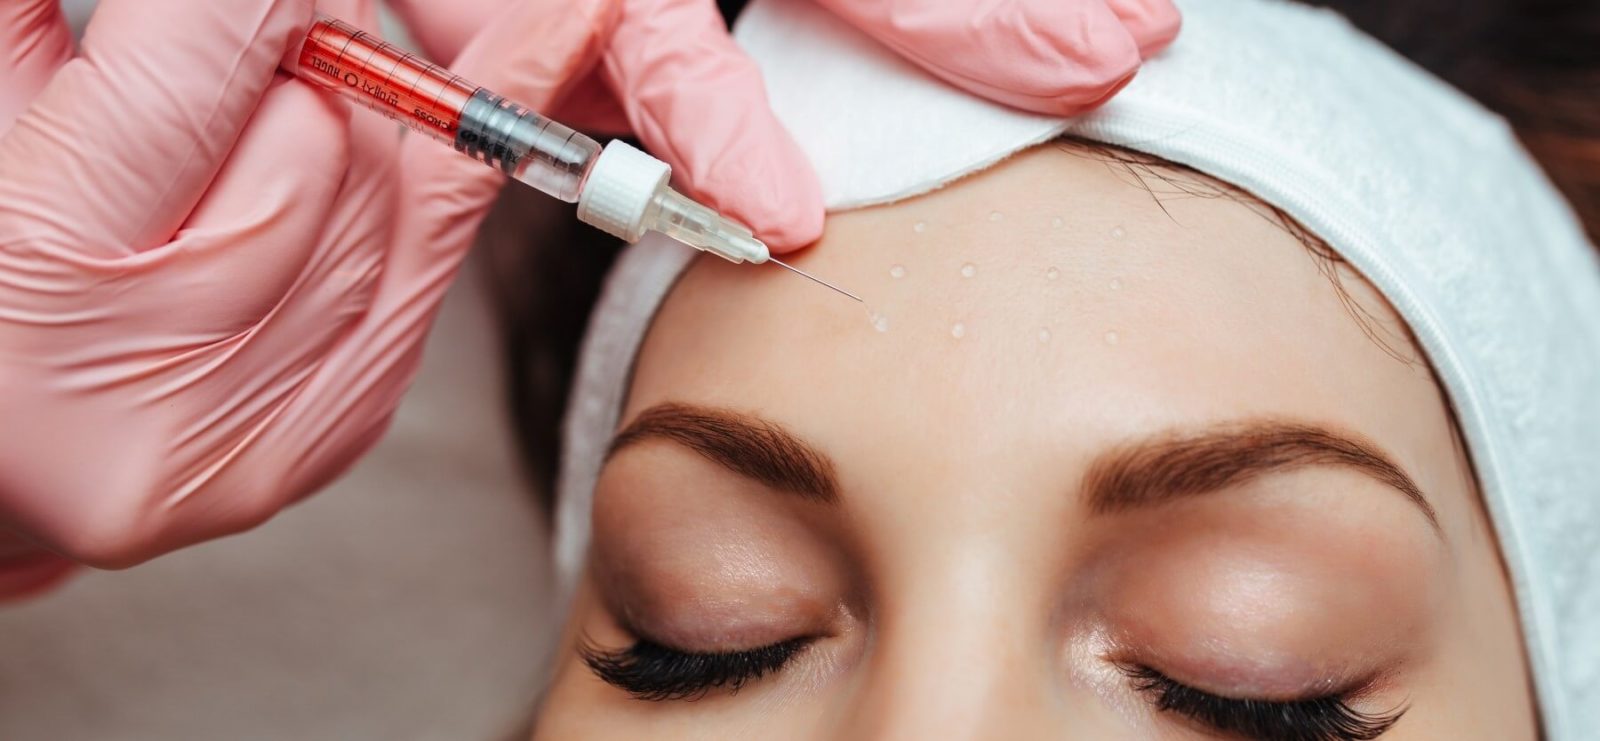 So, Exactly How Much Does Botox Cost?